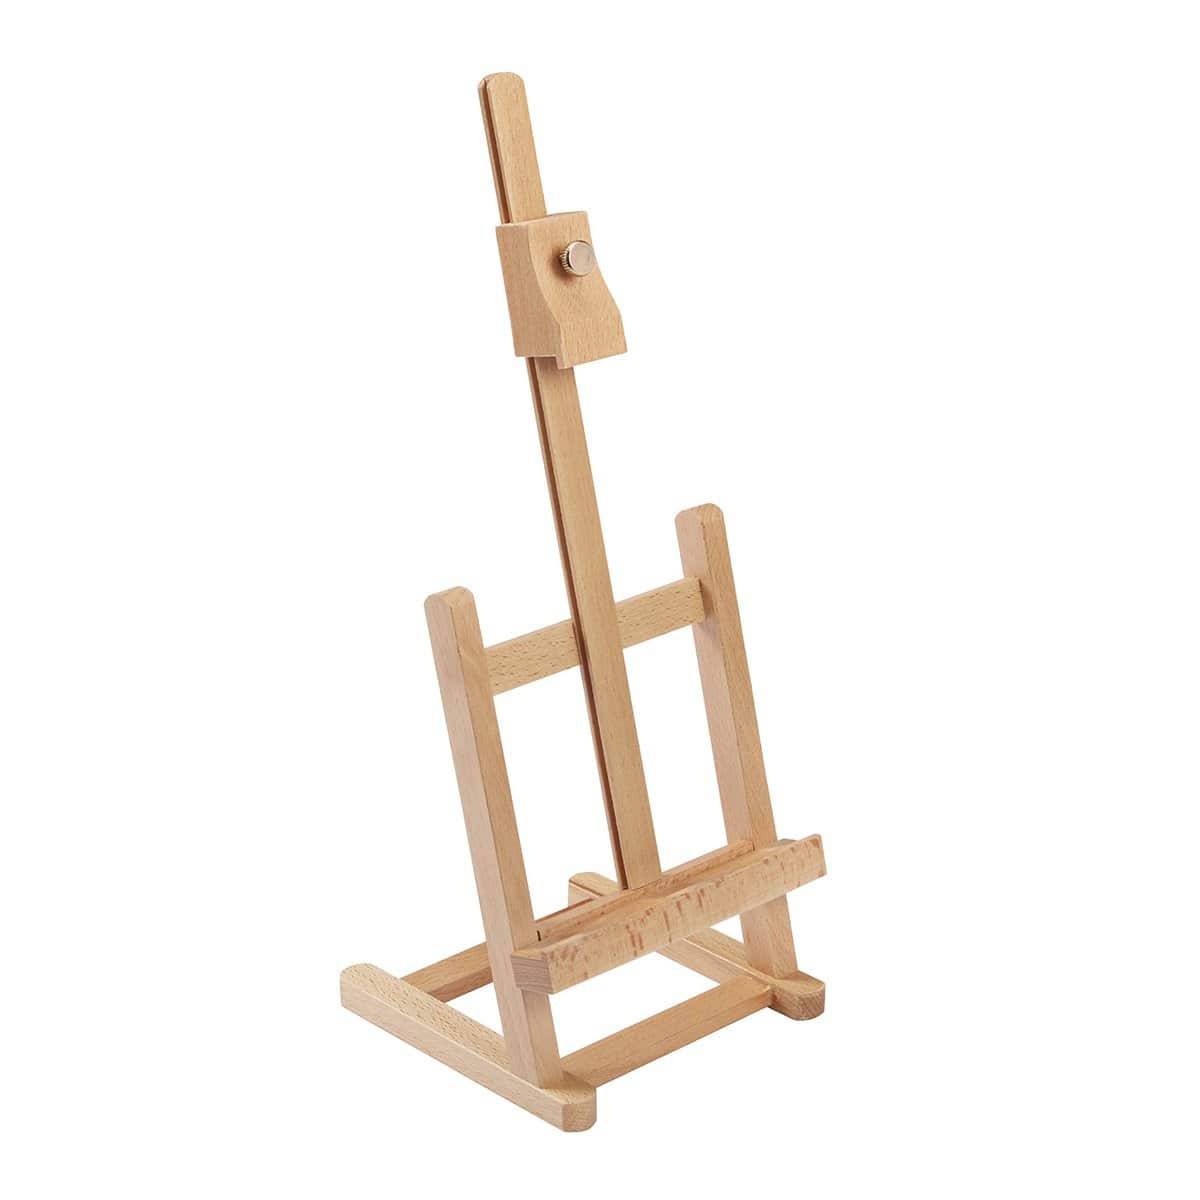 10 Mini Desk Easels Small Display Stand Painting Holder Wood Stand Art  Supplies